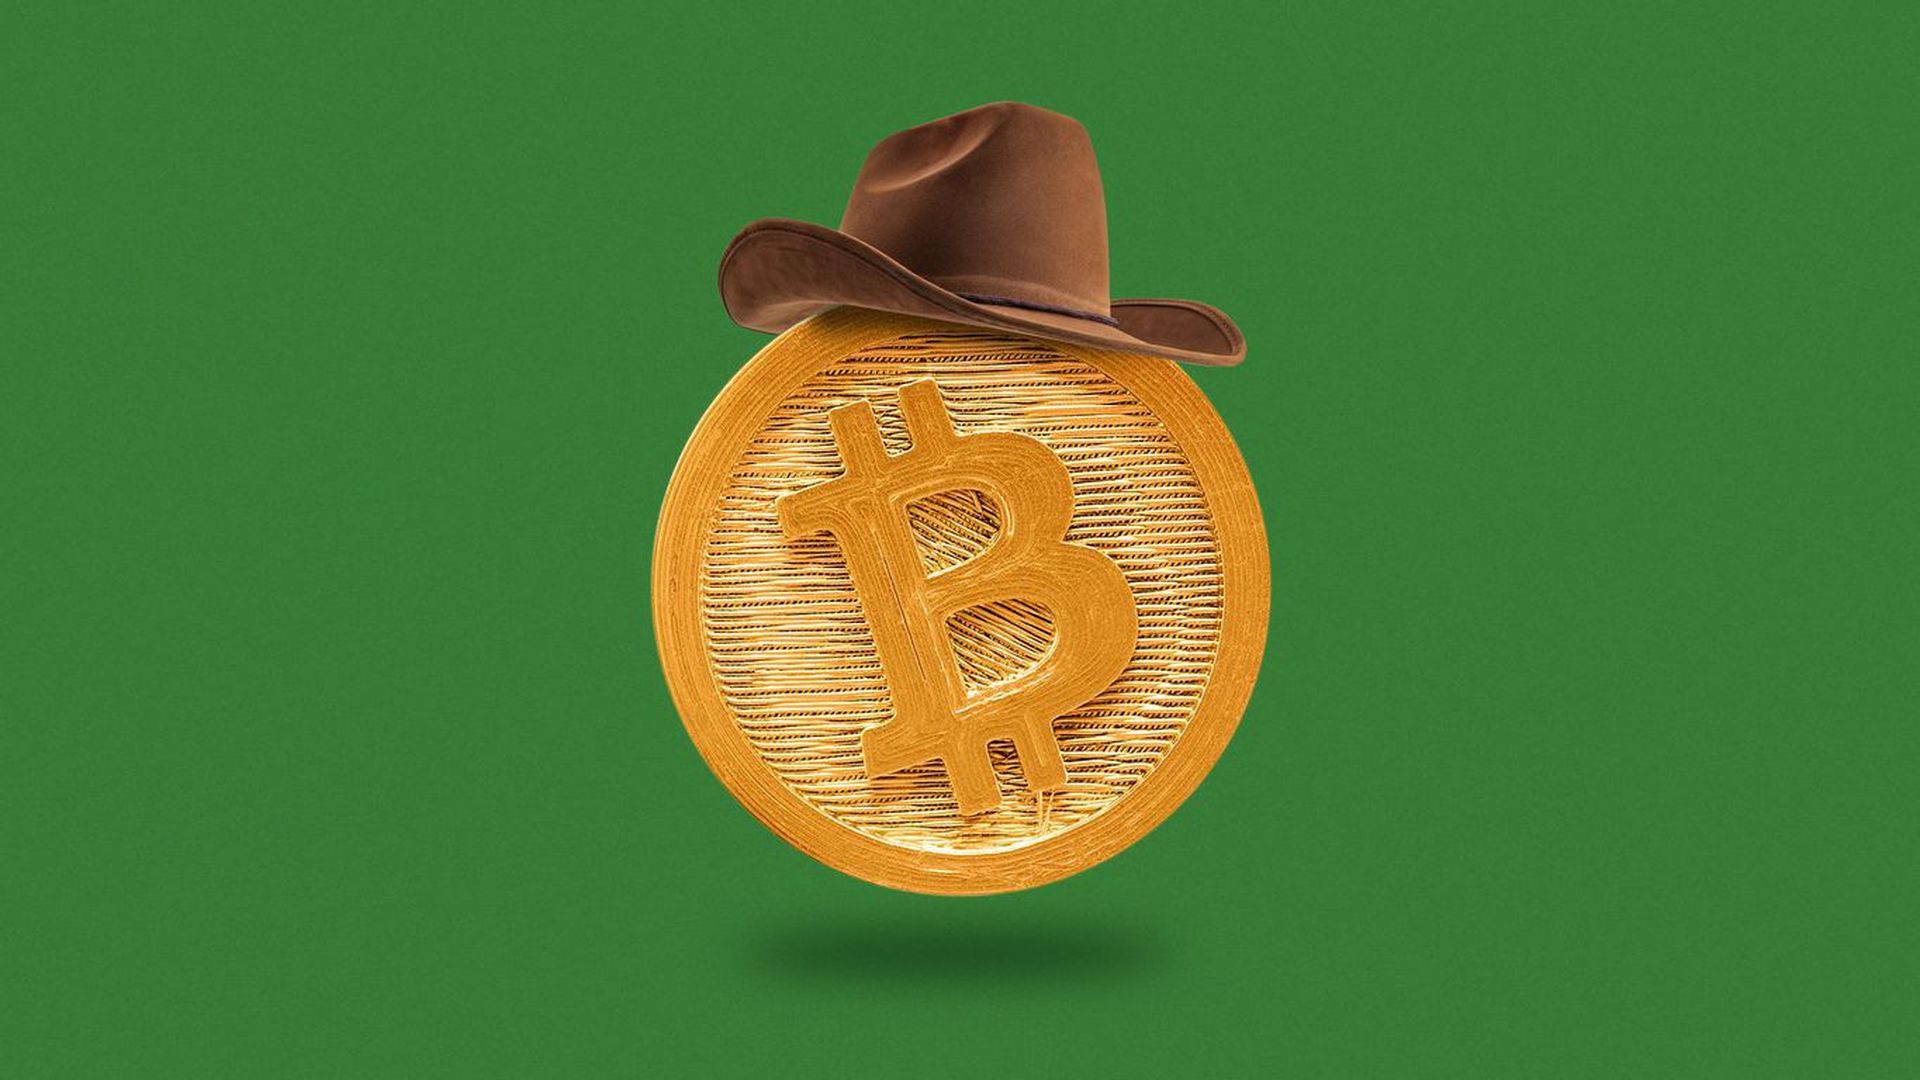 Illustration of a wooden coin, with a bitcoin symbol, wearing a cowboy hat